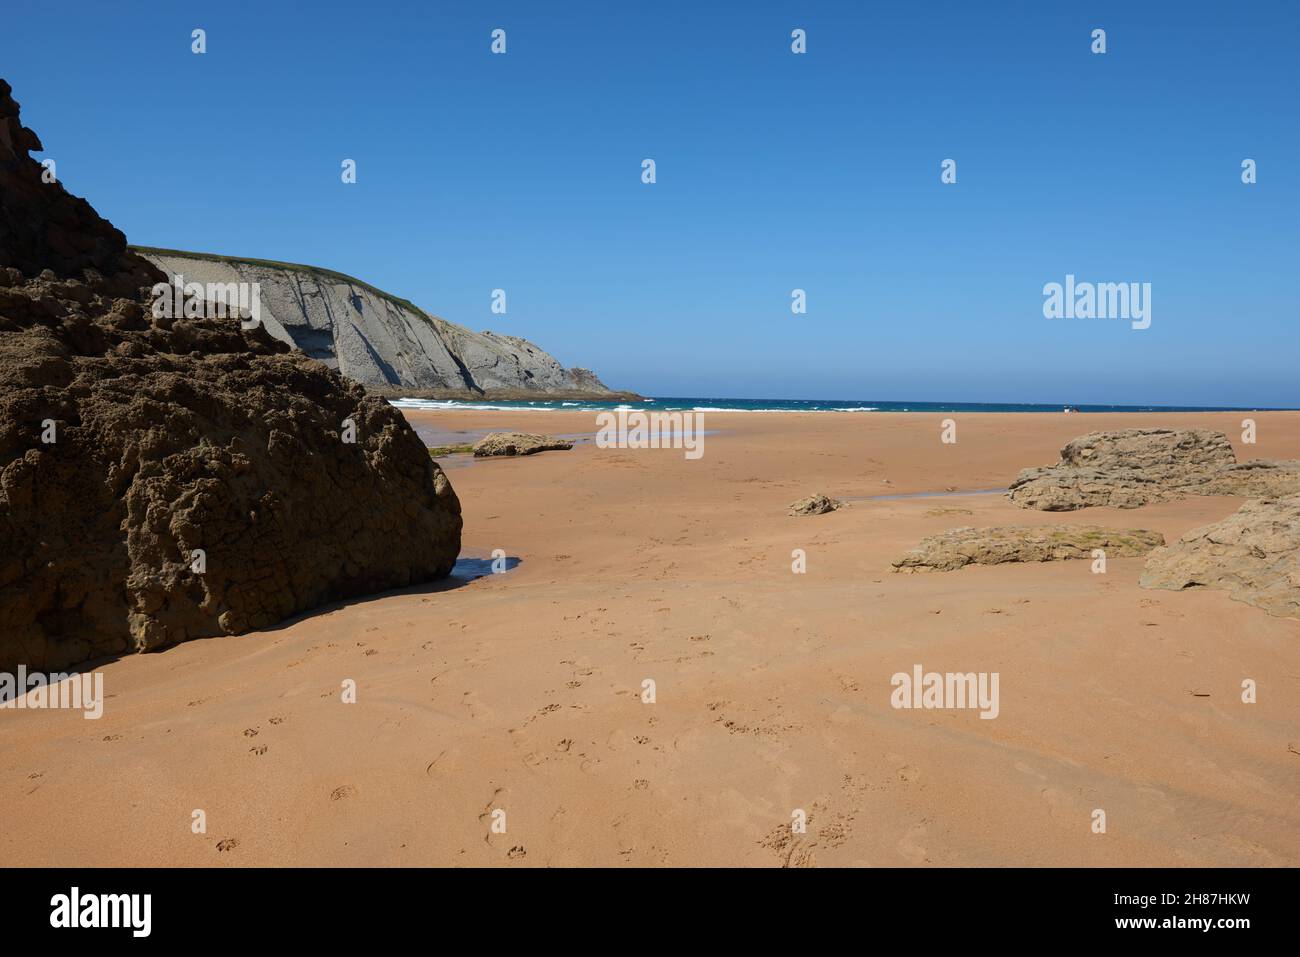 A quiet fine sandy beach with cliffs in the background Stock Photo